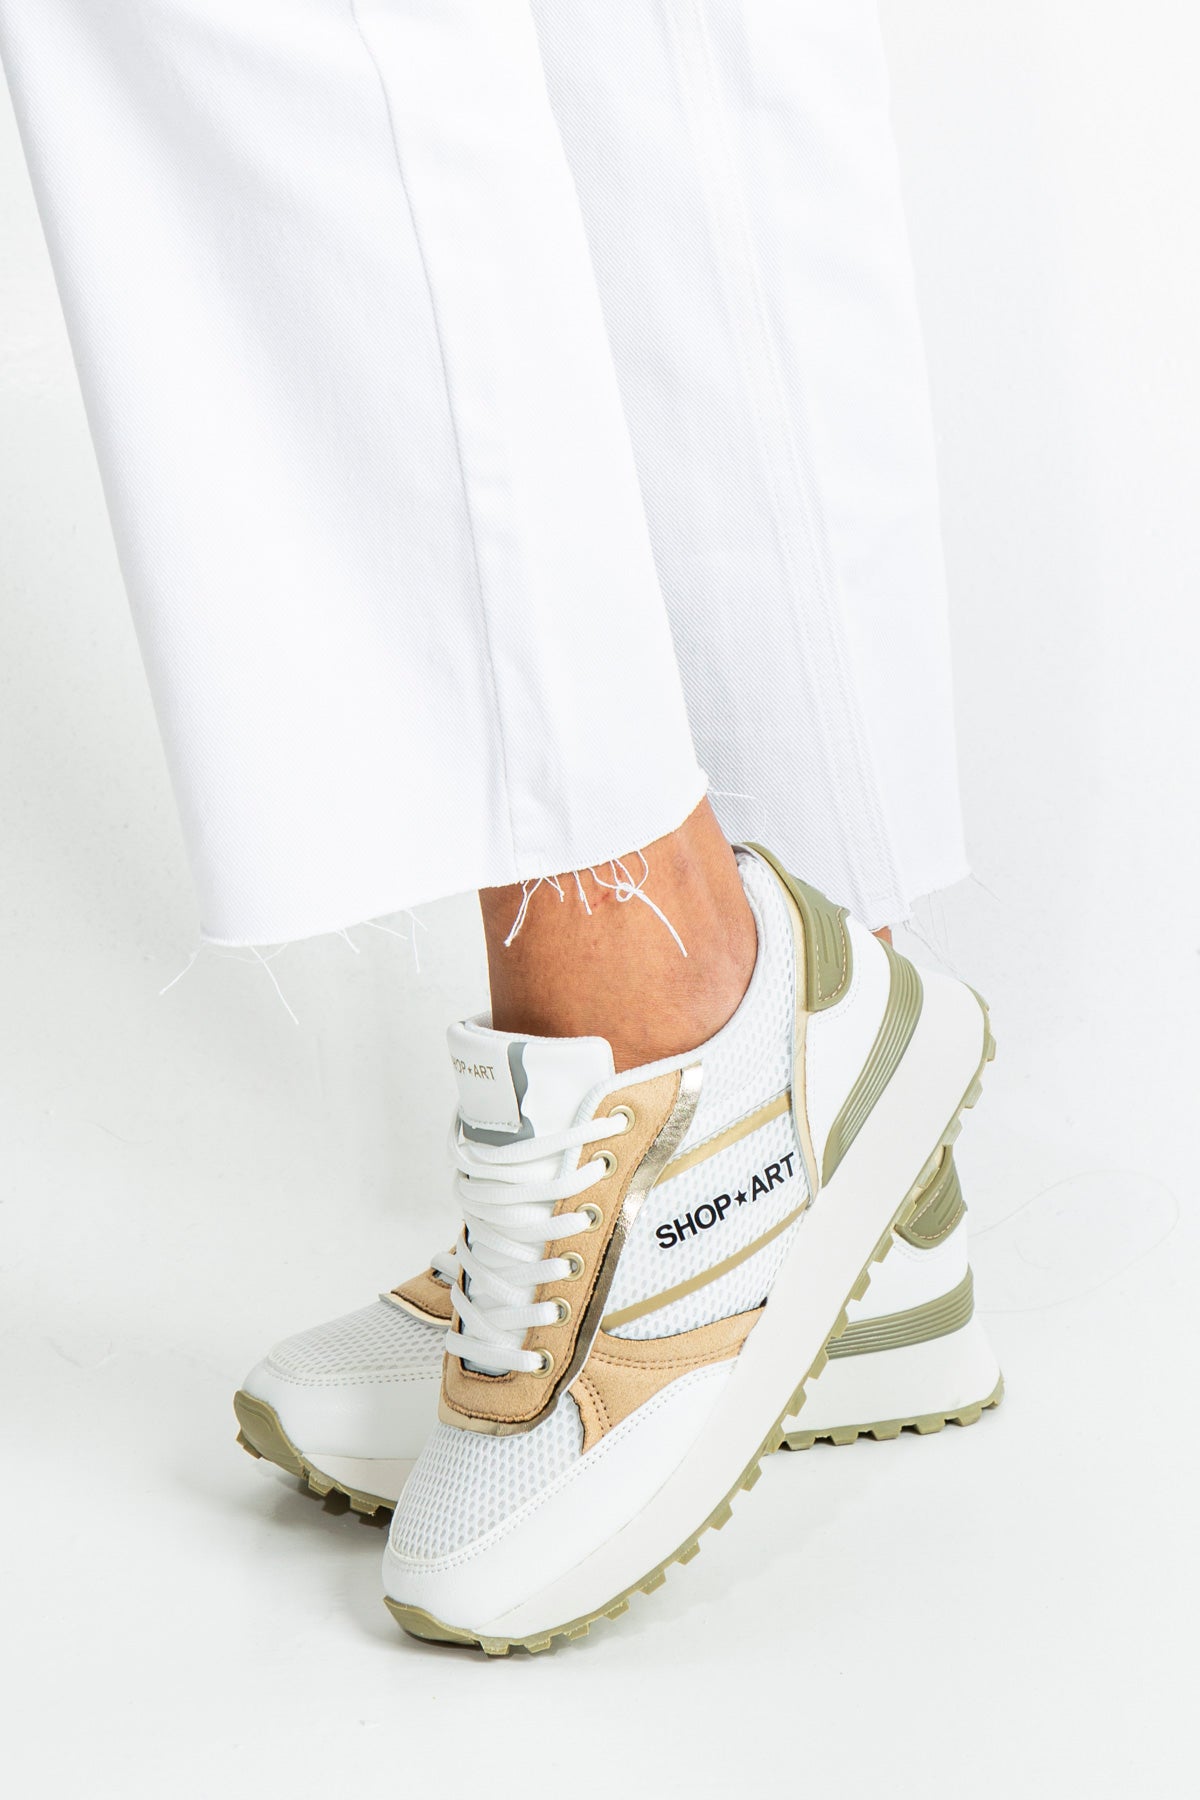 Sneakers sporty-chic